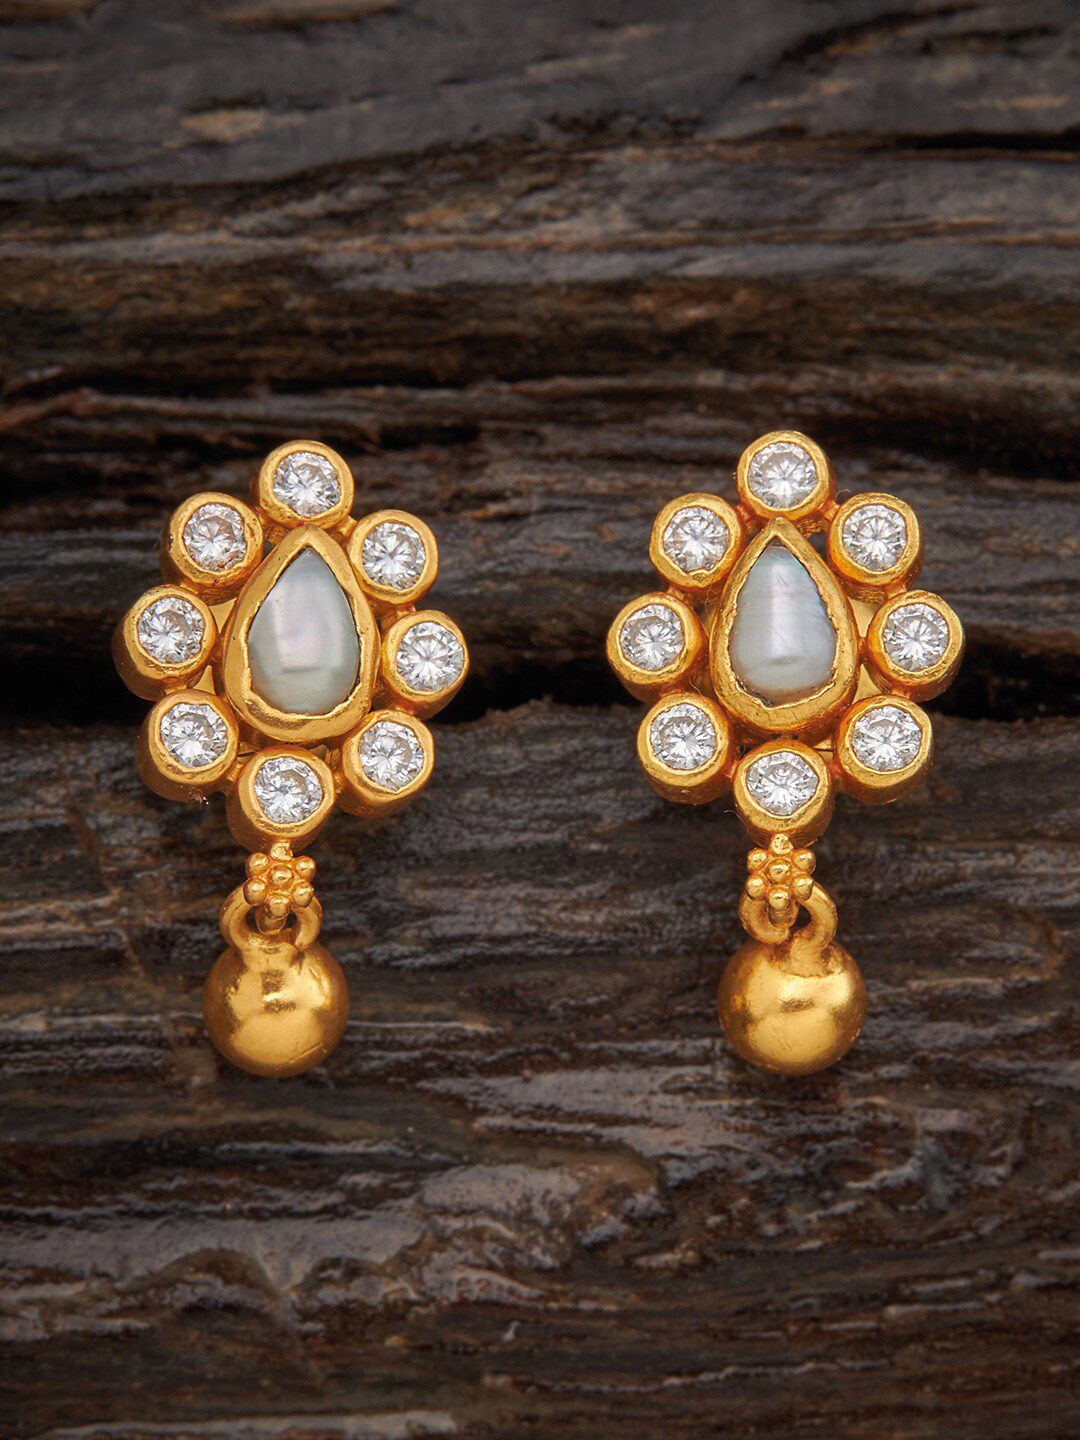 Kushal's Fashion Jewellery White Floral Ear Cuff Earrings Price in India